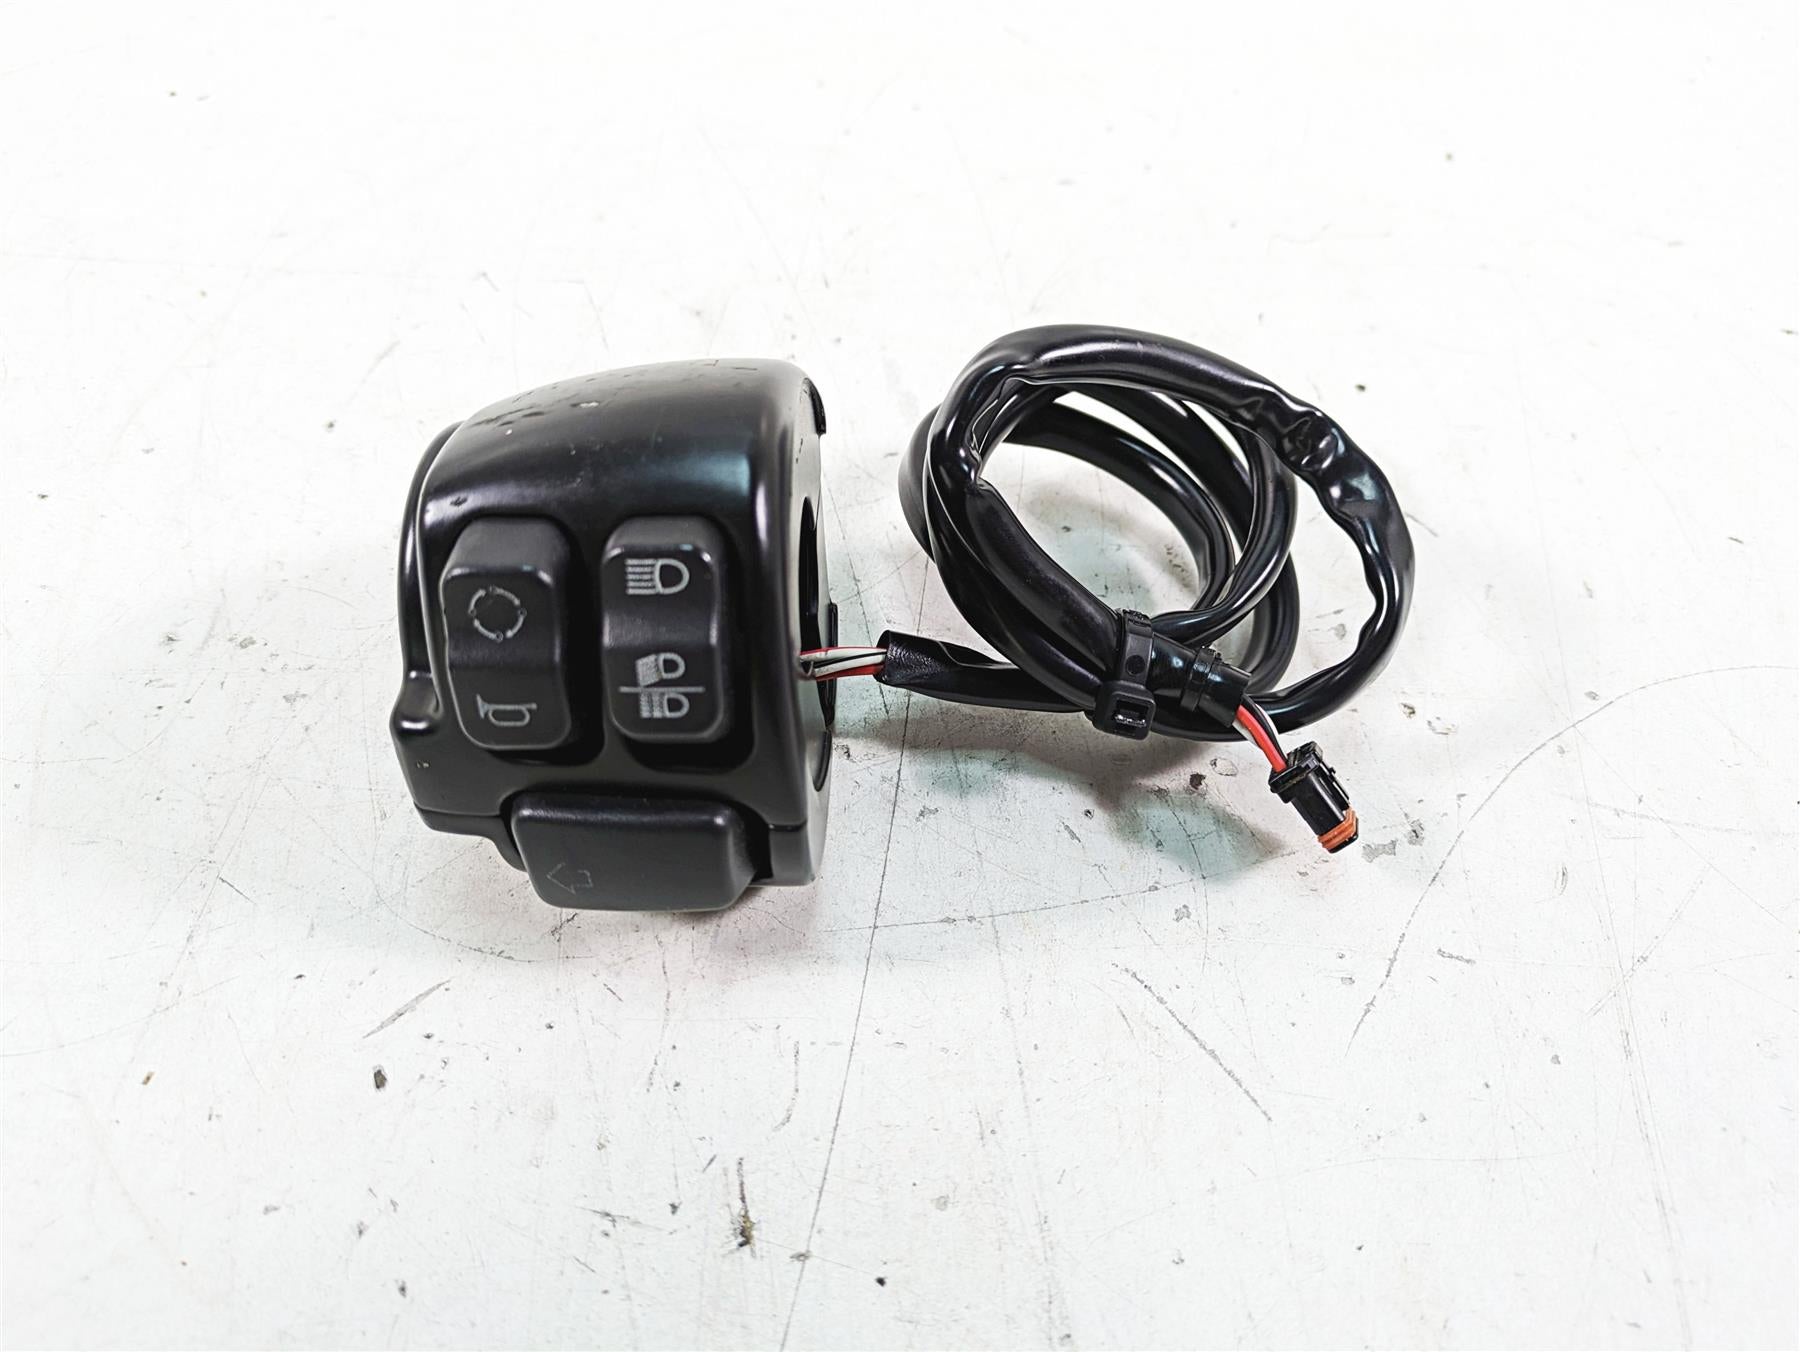 2017 Harley XL883 N Sportster Iron Left Hand Turn Signal Control Switch 71500117 | Mototech271